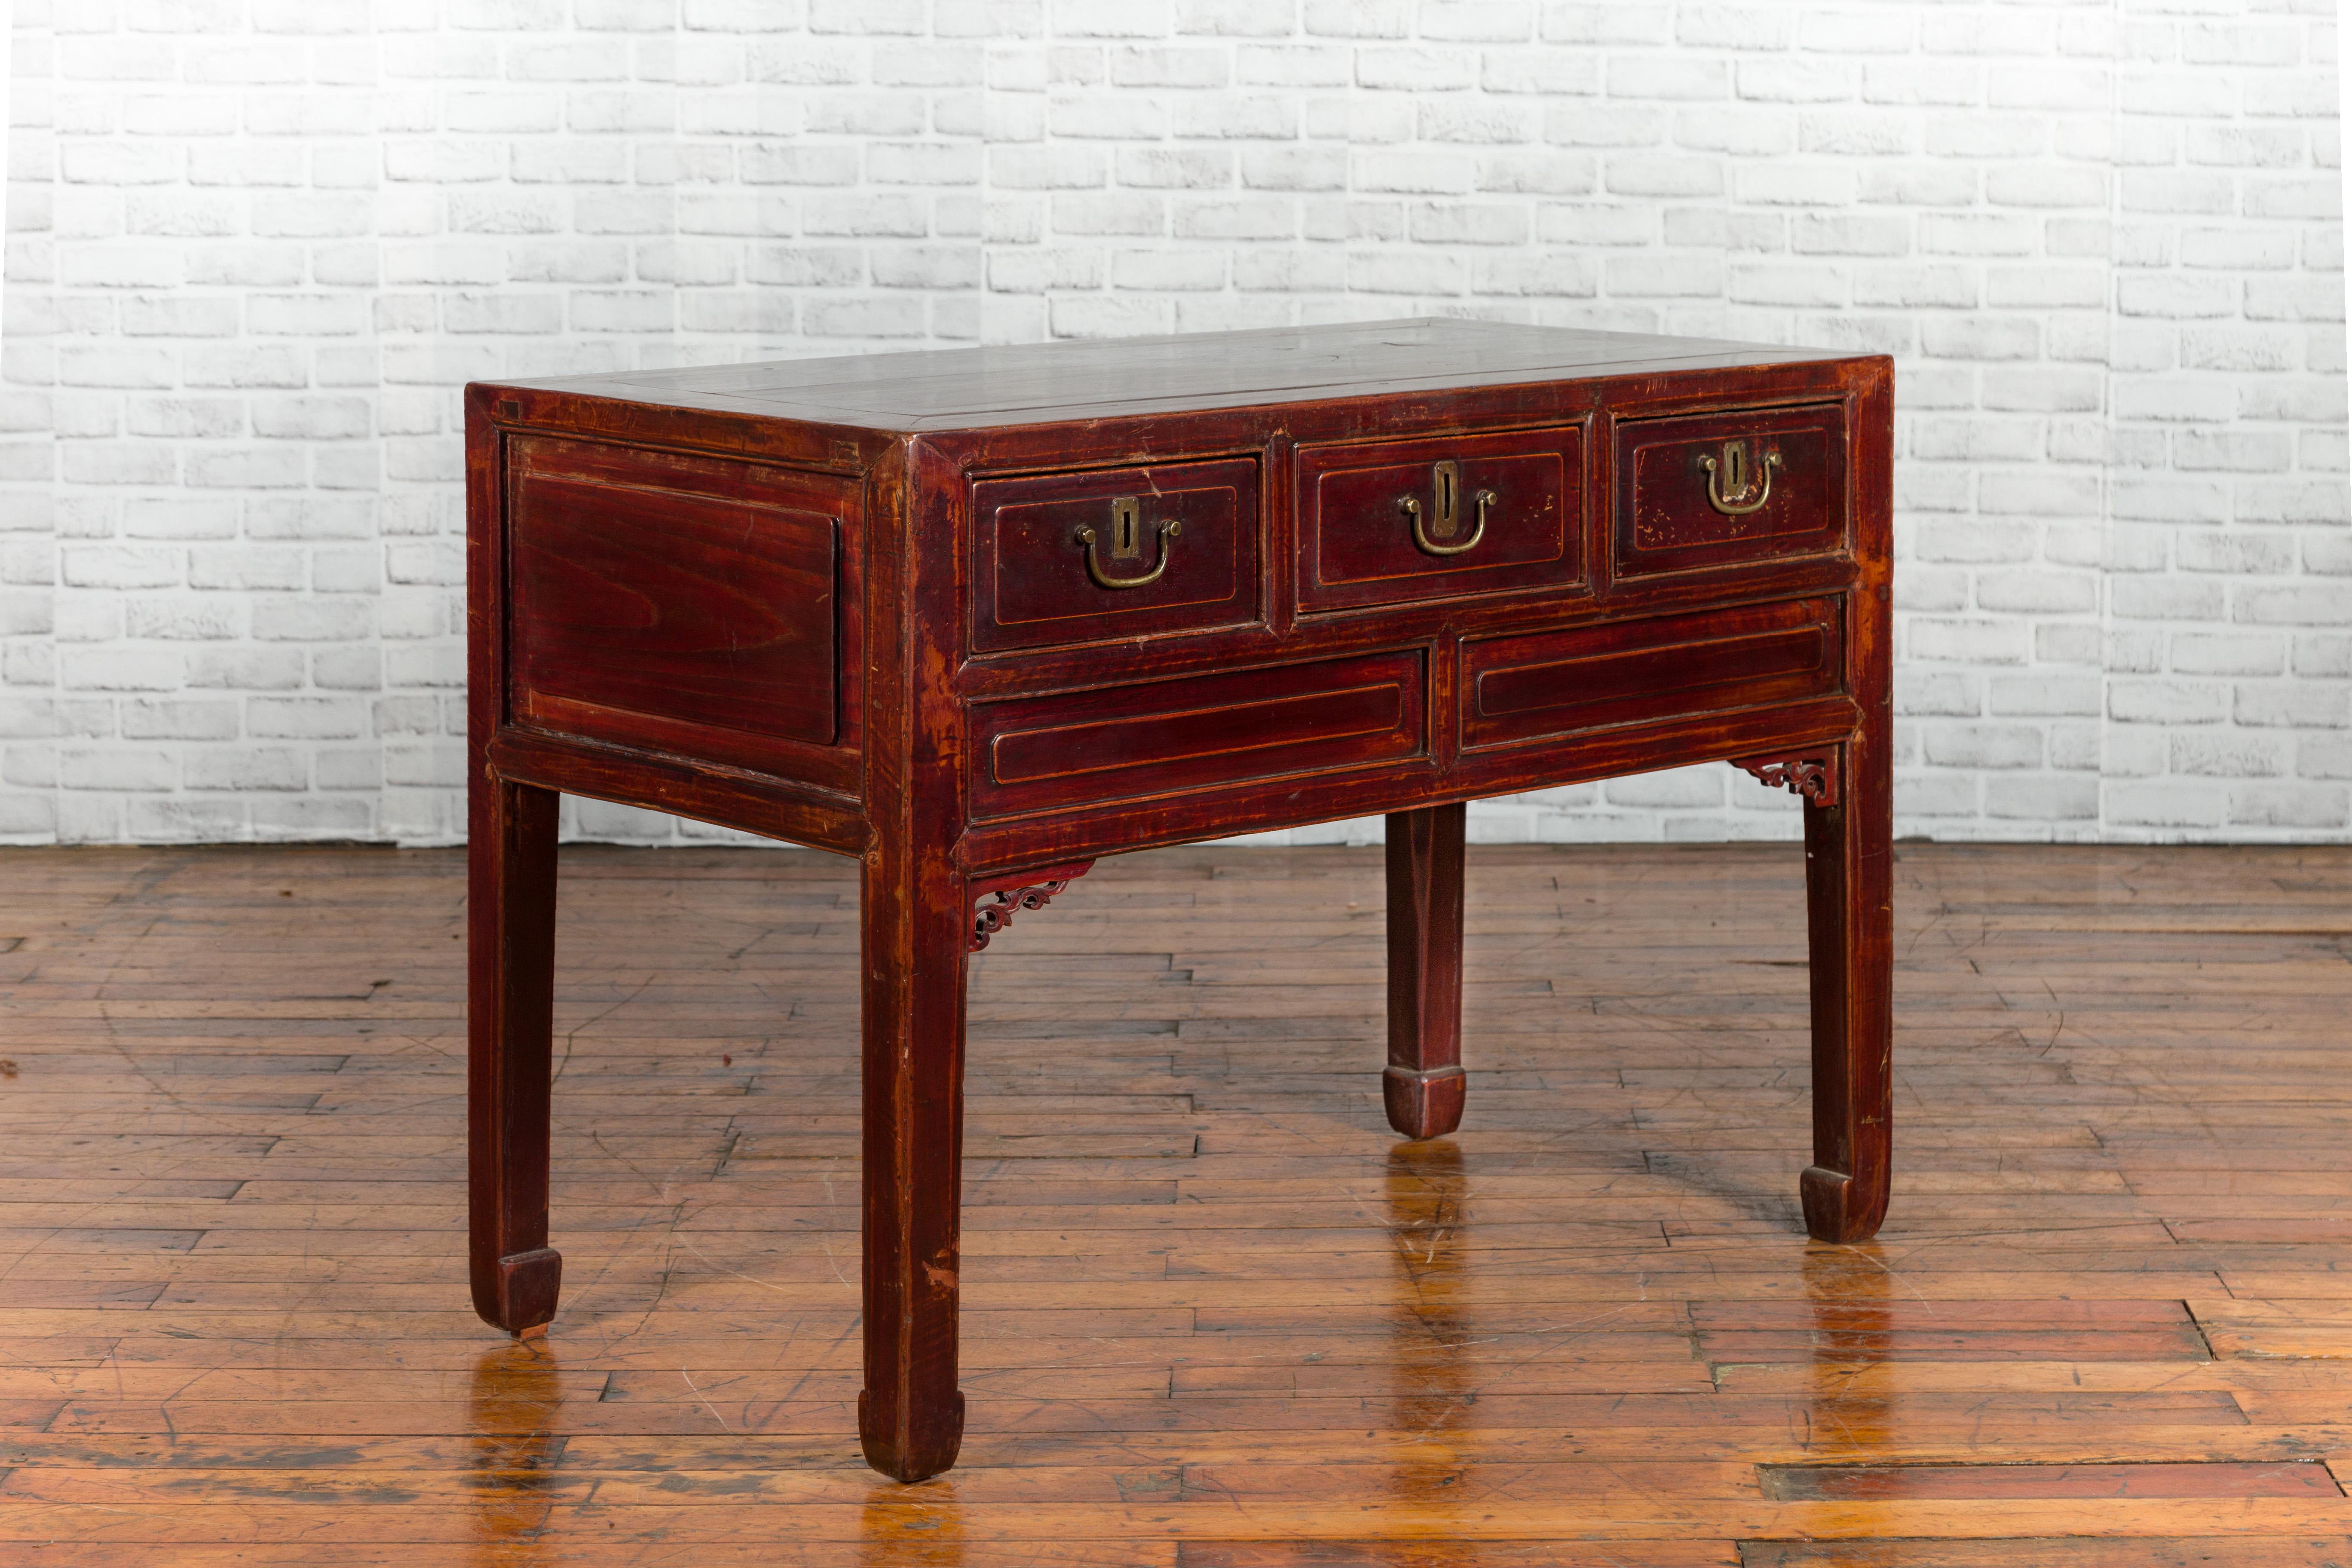 Chinese Antique Console Table with Drawers, Horse Hoof Legs and Dark Red Patina For Sale 5